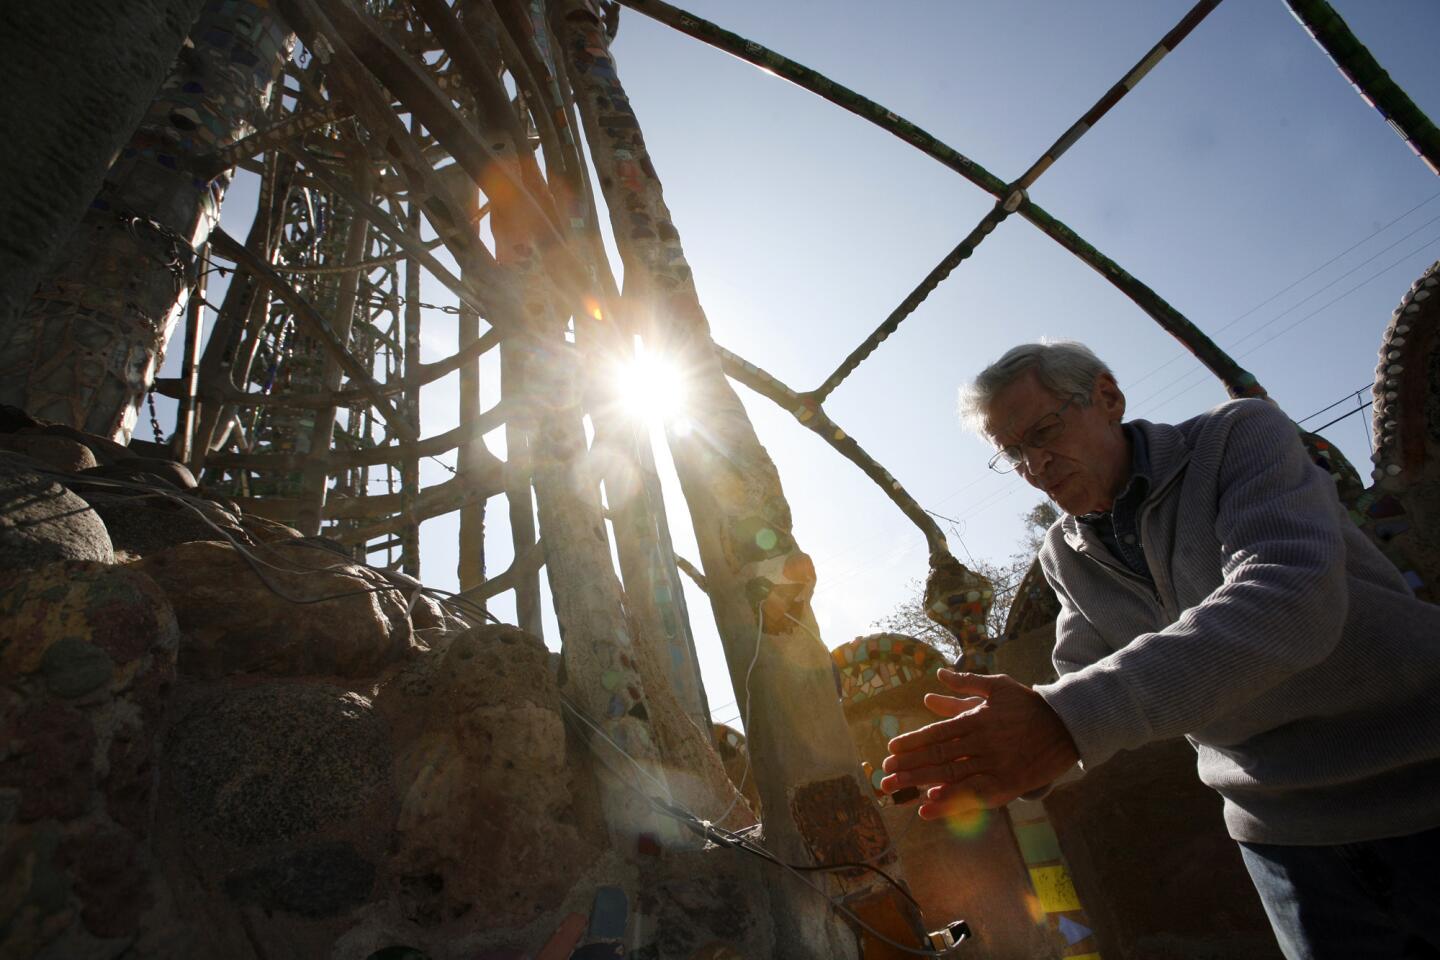 LACMA conservation scientist Frank Preusser has hooked the Watts Towers up to several devices. Three sensors track movements of the cracks, measuring wind gusts and minute vibrations.